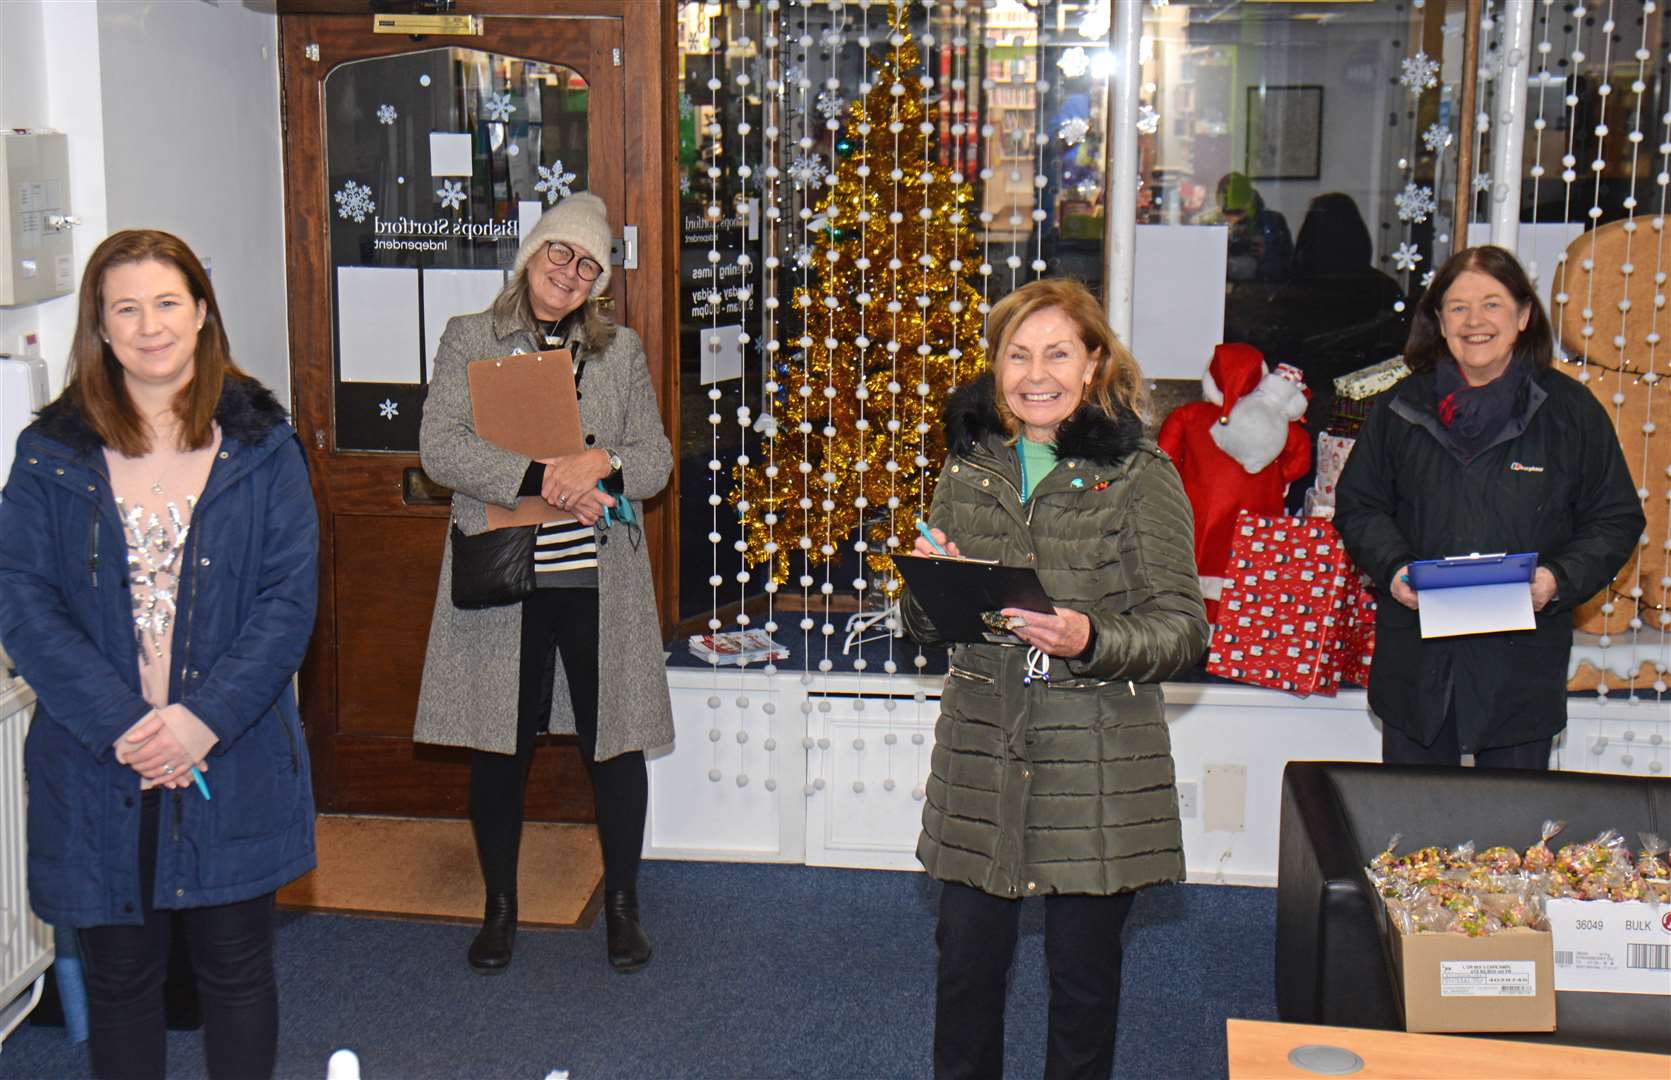 Isabel Hospice Christmas shop window competition judges, from left, Gina Thomas (Bishop's Stortford BID manager), Katie Bradshaw (Coco's chocolaterie owner), Renee Friend (Isabel Hospice fundraiser) and Barbara Doherty (Isabel Hospice life president). Picture: Vikki Lince (43636673)